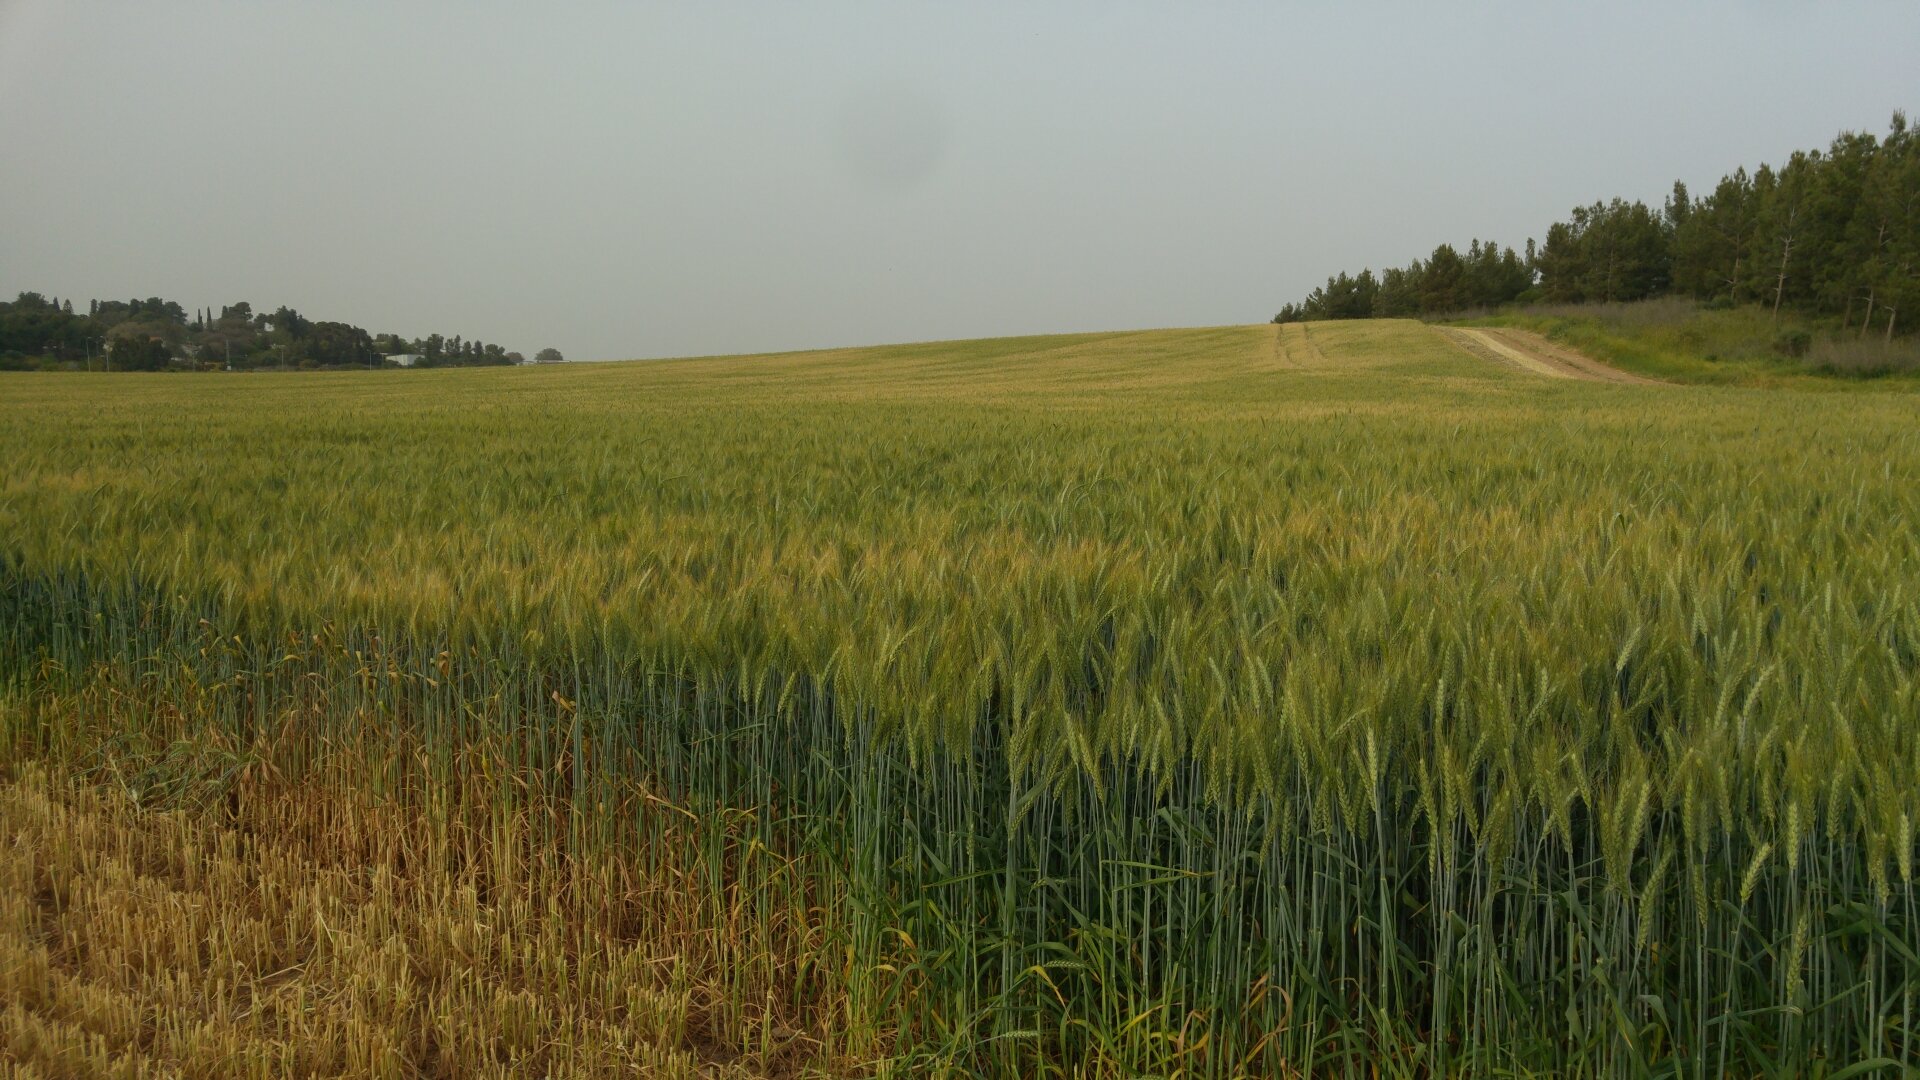 How does the social behavior of wheat plants influence grain production?